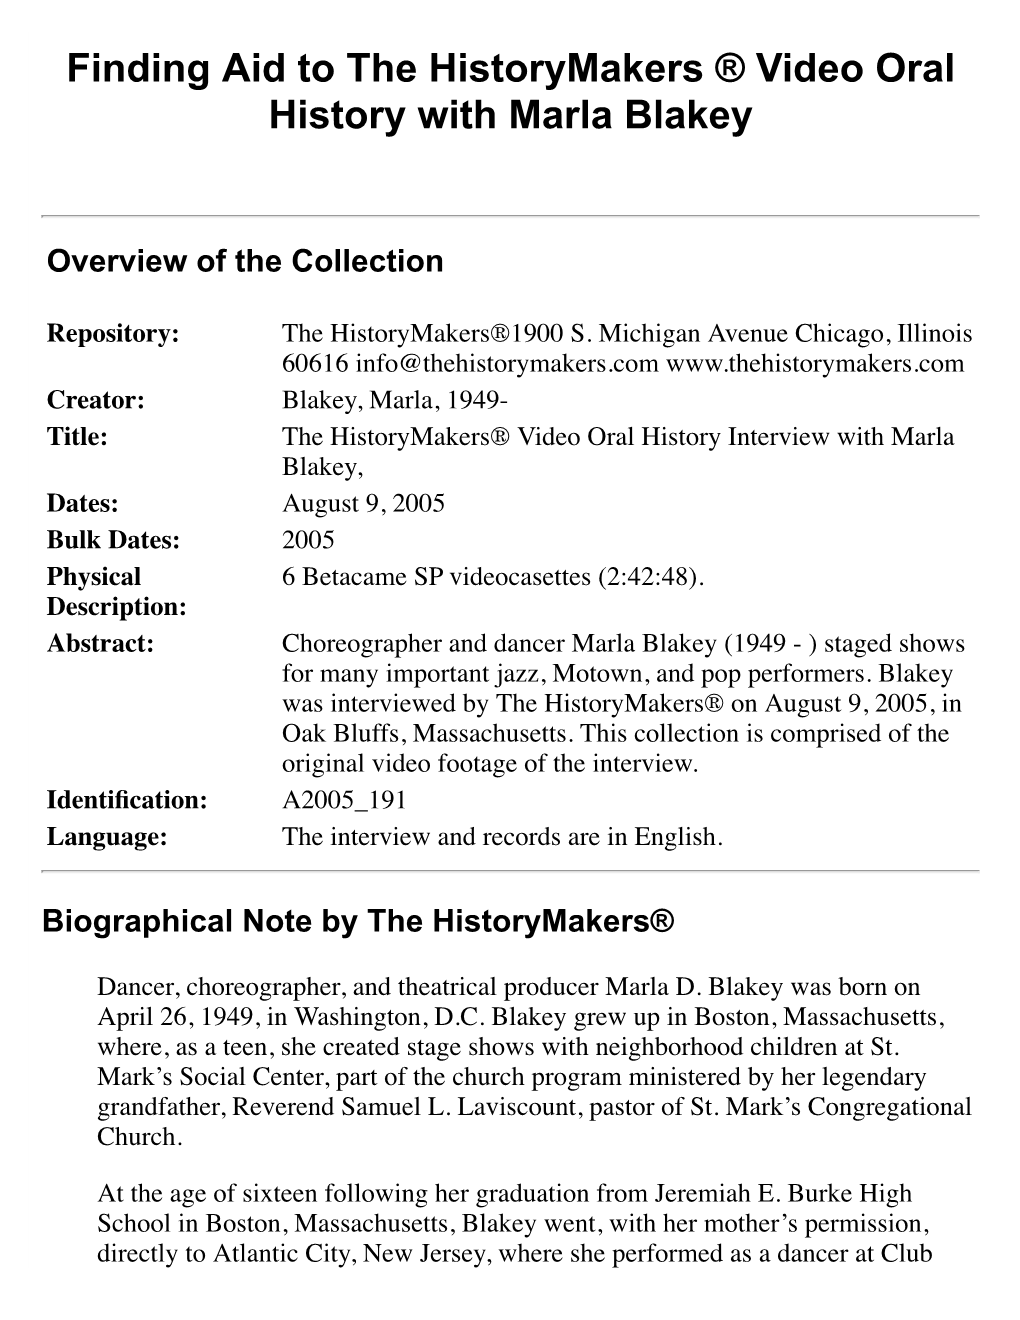 Finding Aid to the Historymakers ® Video Oral History with Marla Blakey